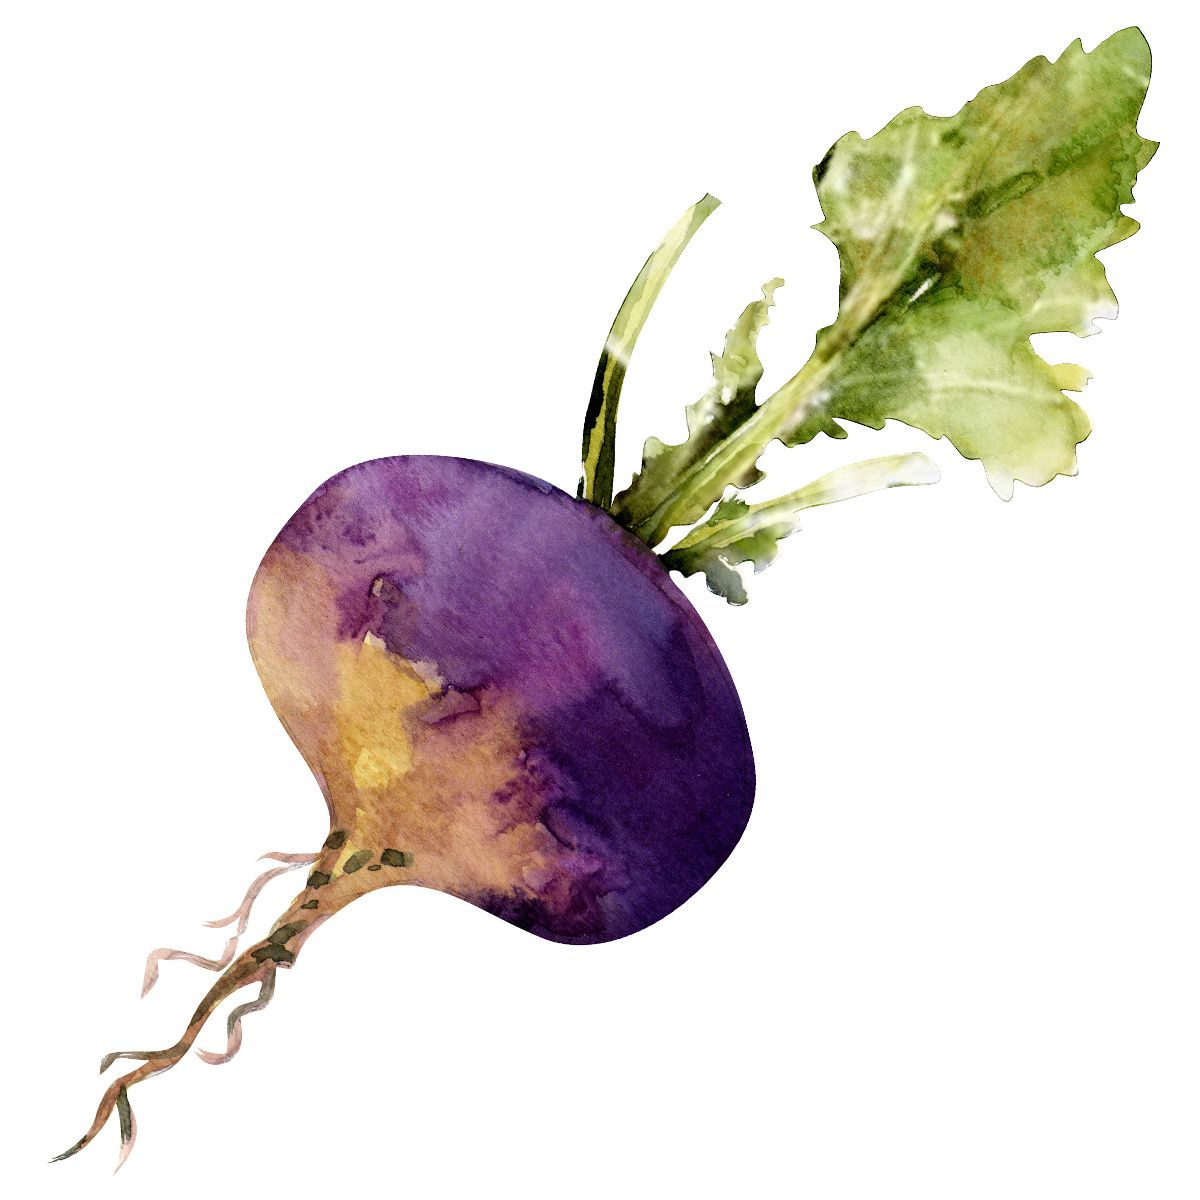 Fun fact! The smaller the turnip's bulb, the sweeter a turnip tastes. ow.ly/zcPz50OQoc0 #funfact #fridayfunfact